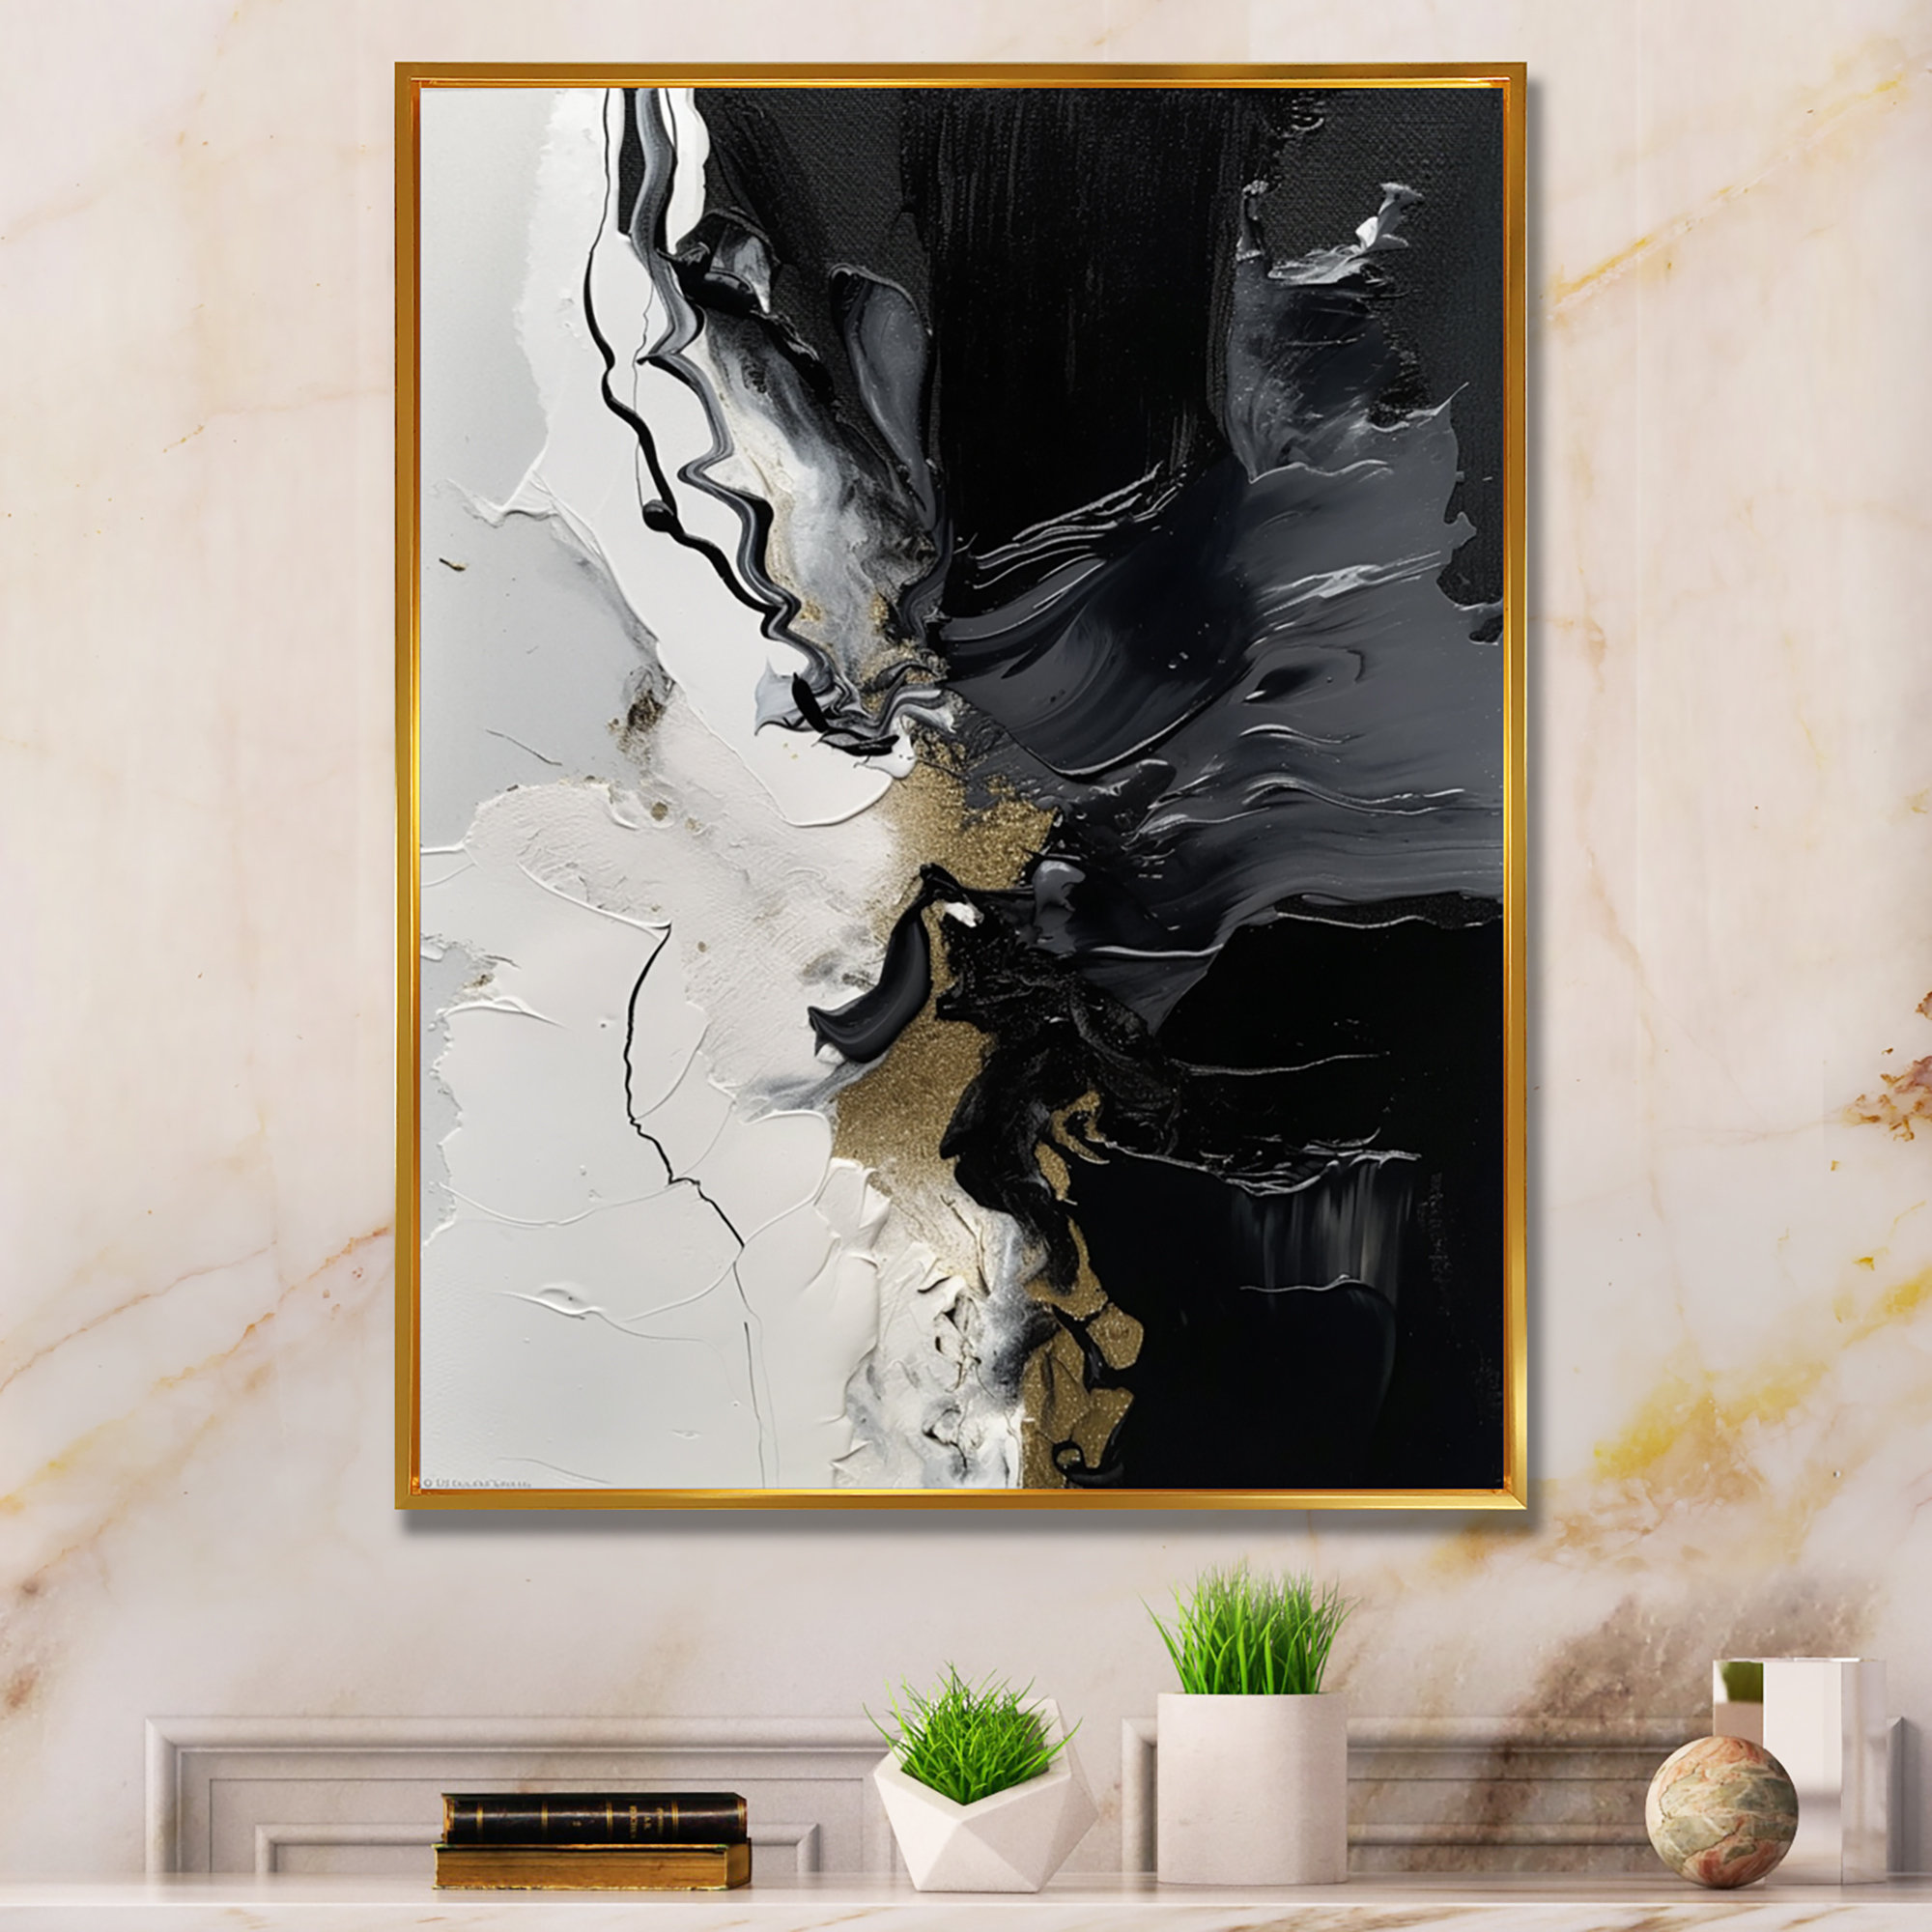 Abstract Wall Art Splatter Painting Large Painting On Canvas Black